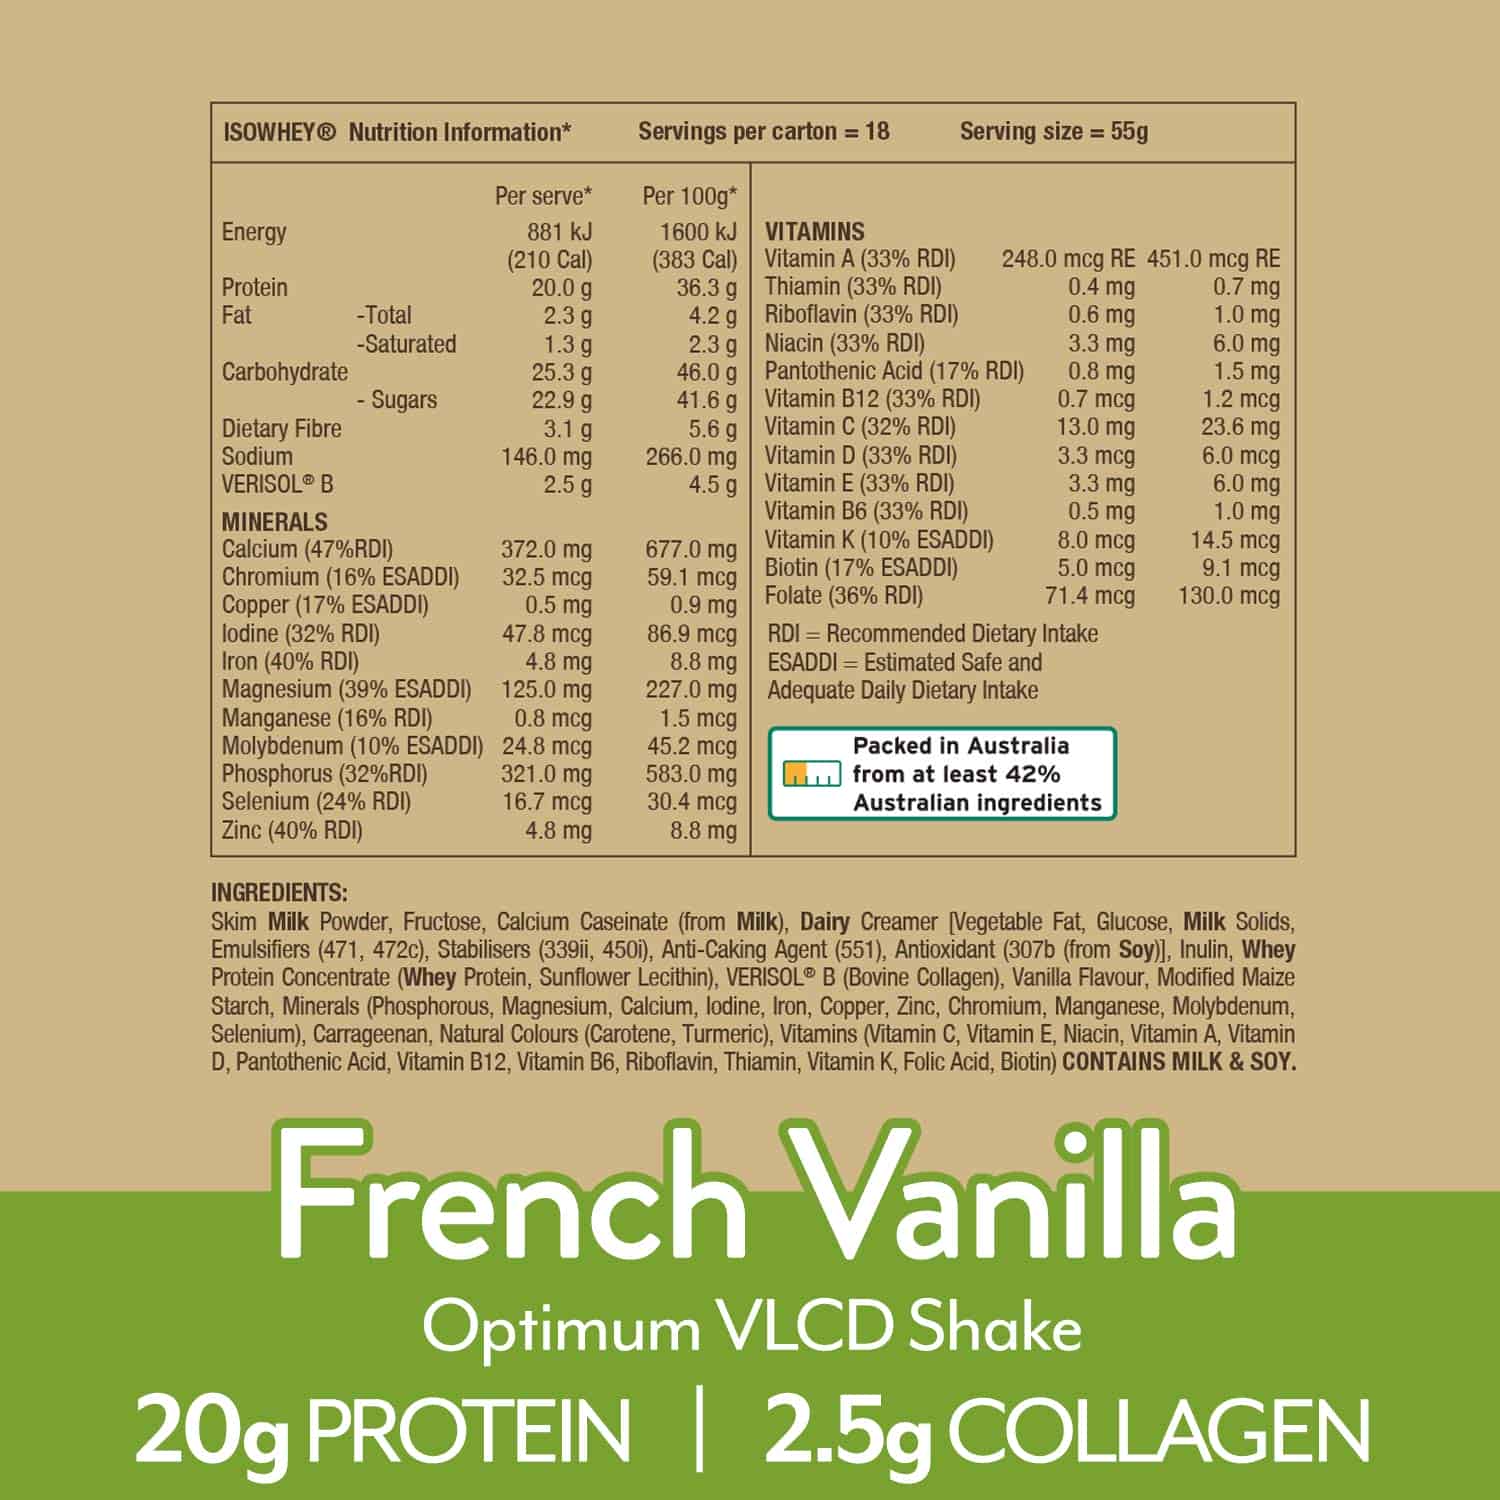 IsoWhey Optimum VLCD Shake French Vanilla Ingredients and Nutritional information for rapid weight loss